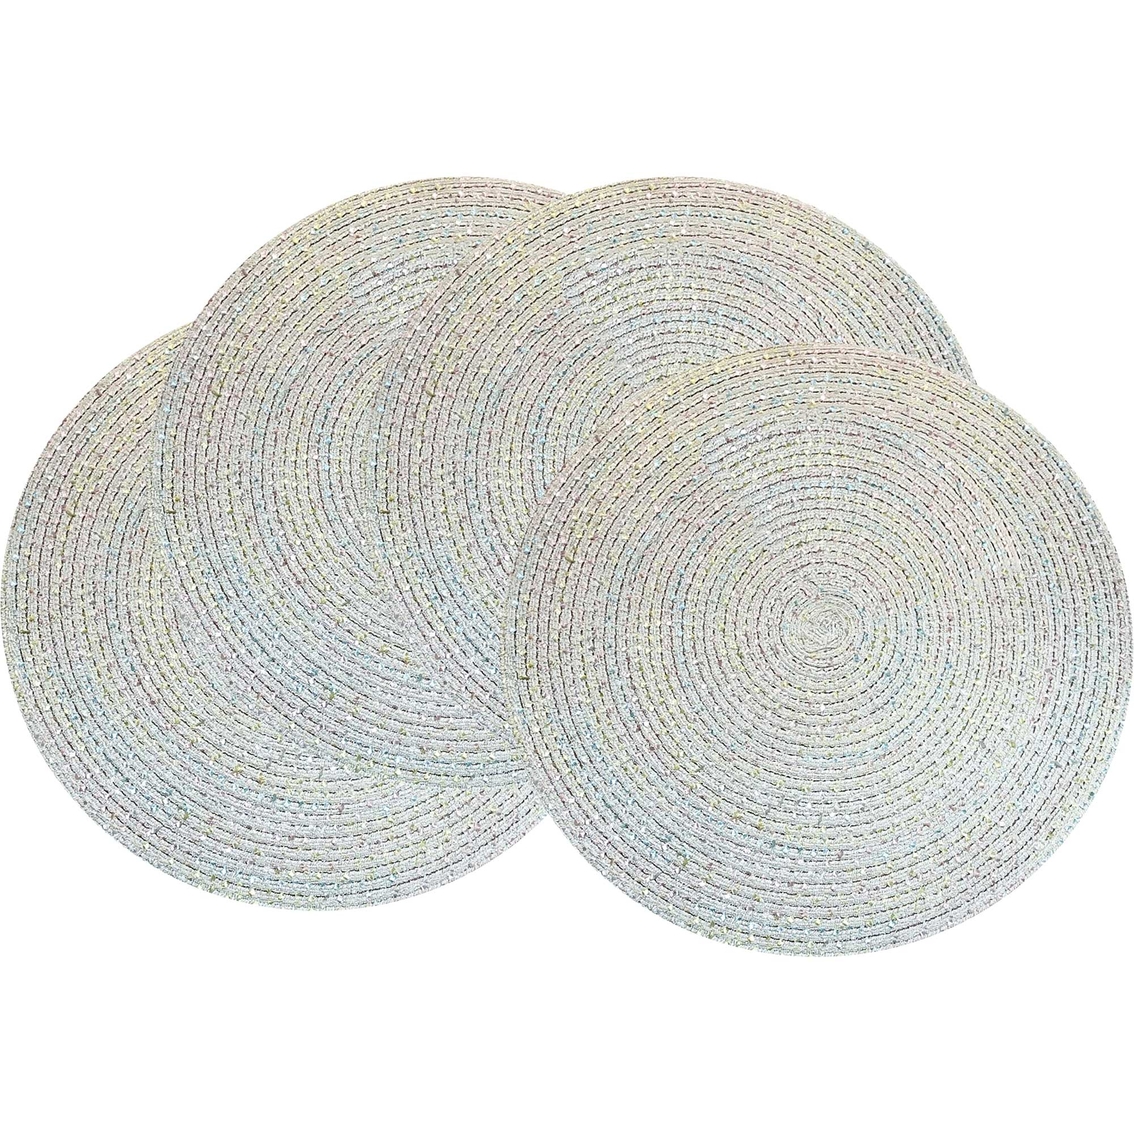 Benson Mills Boucle Round Placemats Set of 4